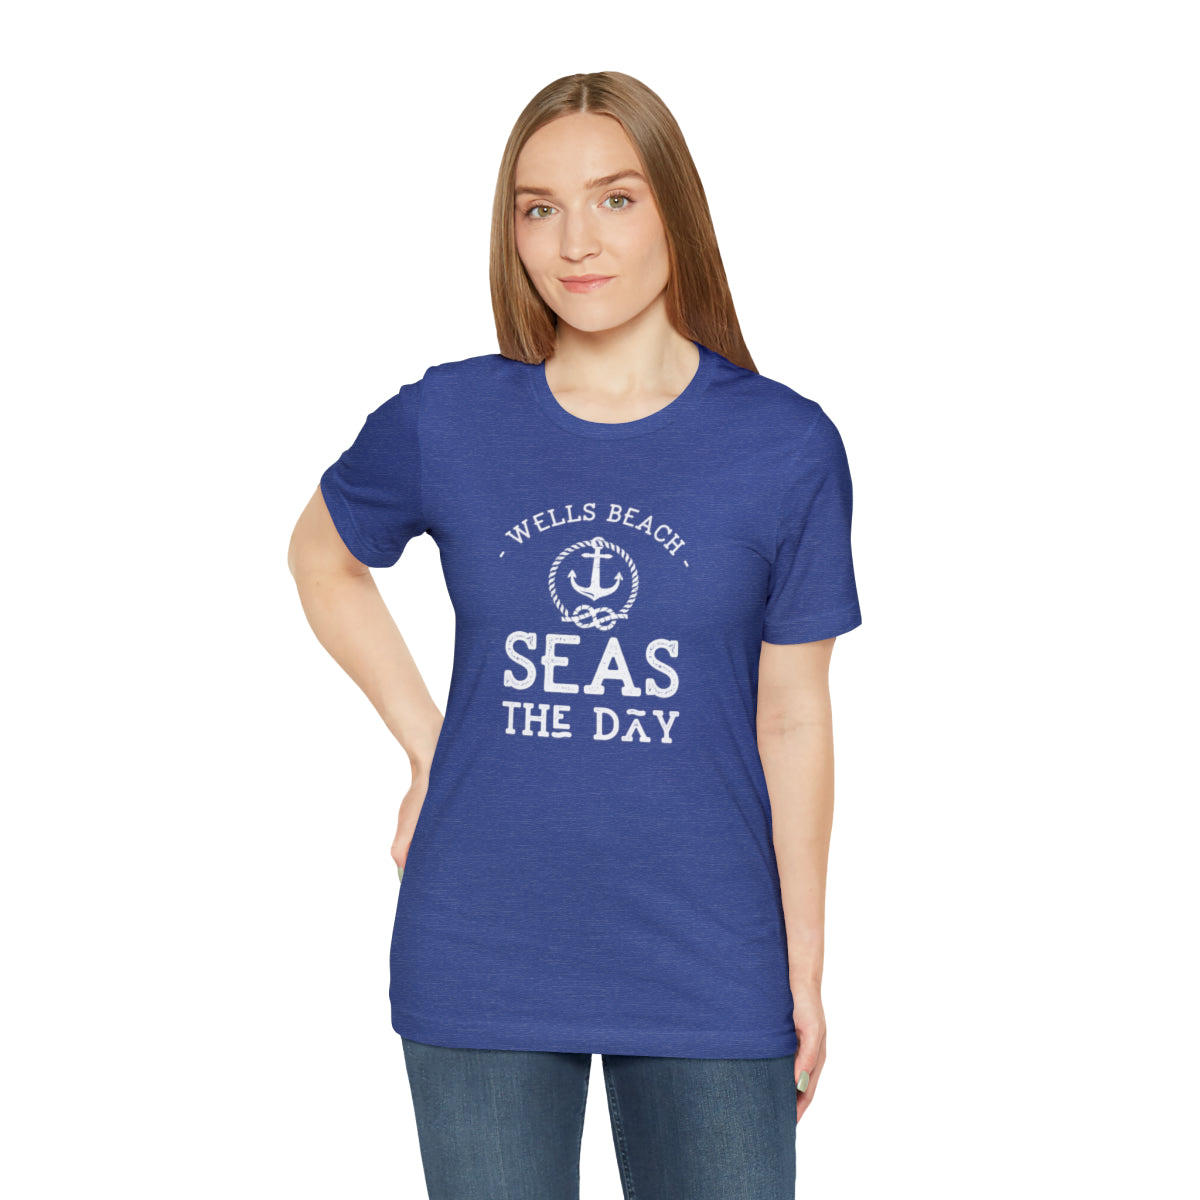 Personalized Unisex Weekend Tee, Seas The Day Print, Heather Royal Blue